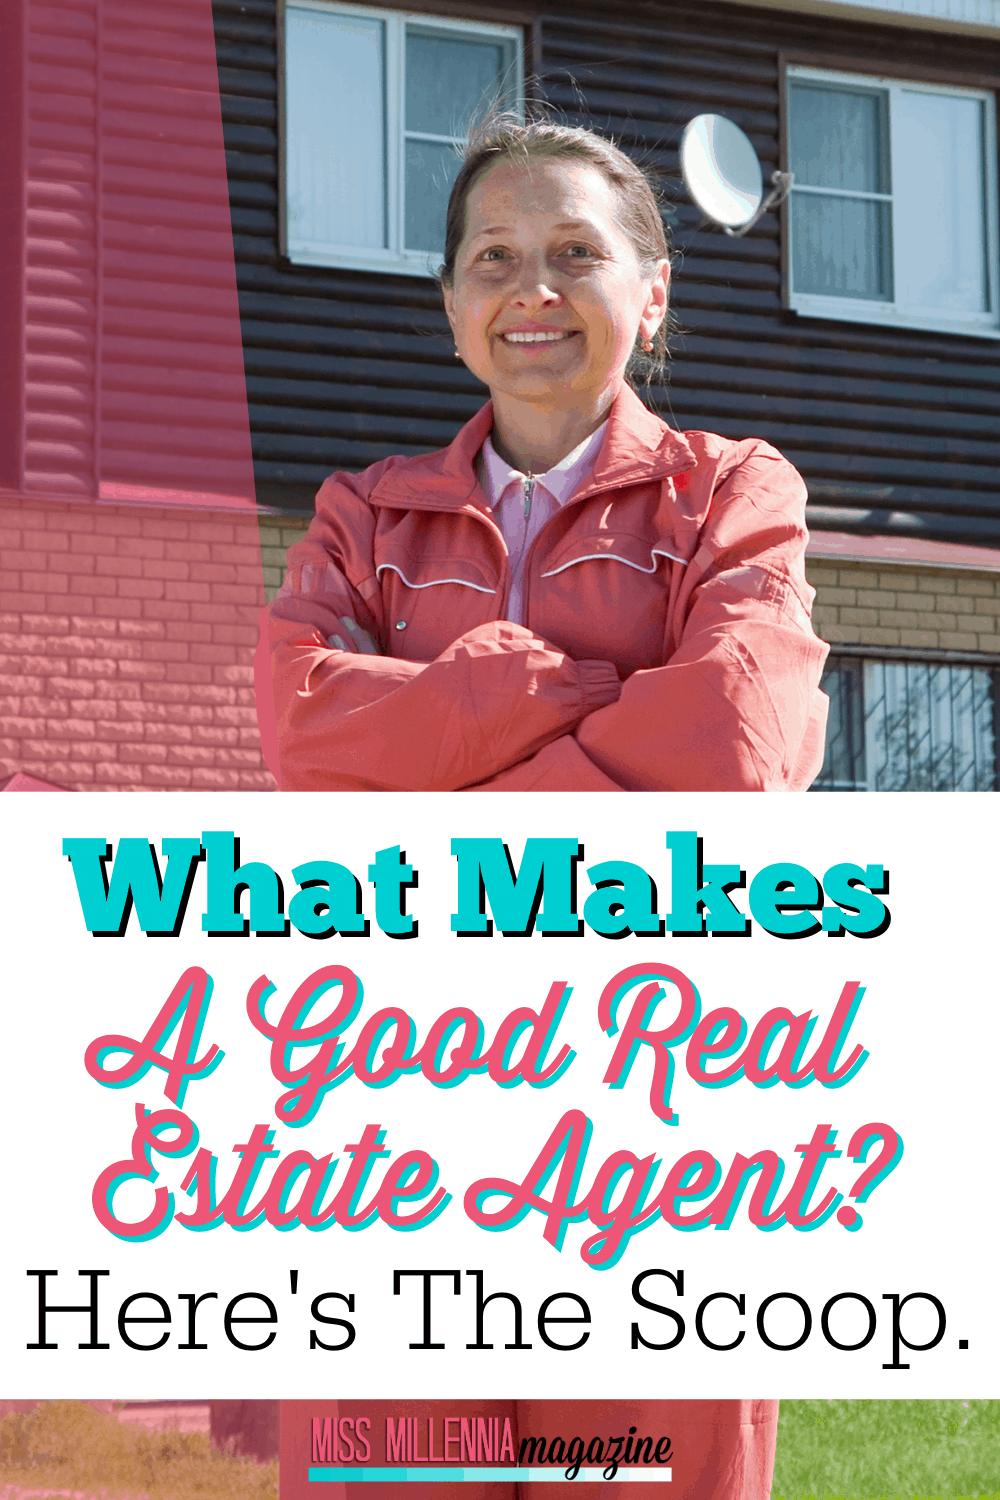 What Makes A Good Real Estate Agent? Here’s The Scoop.